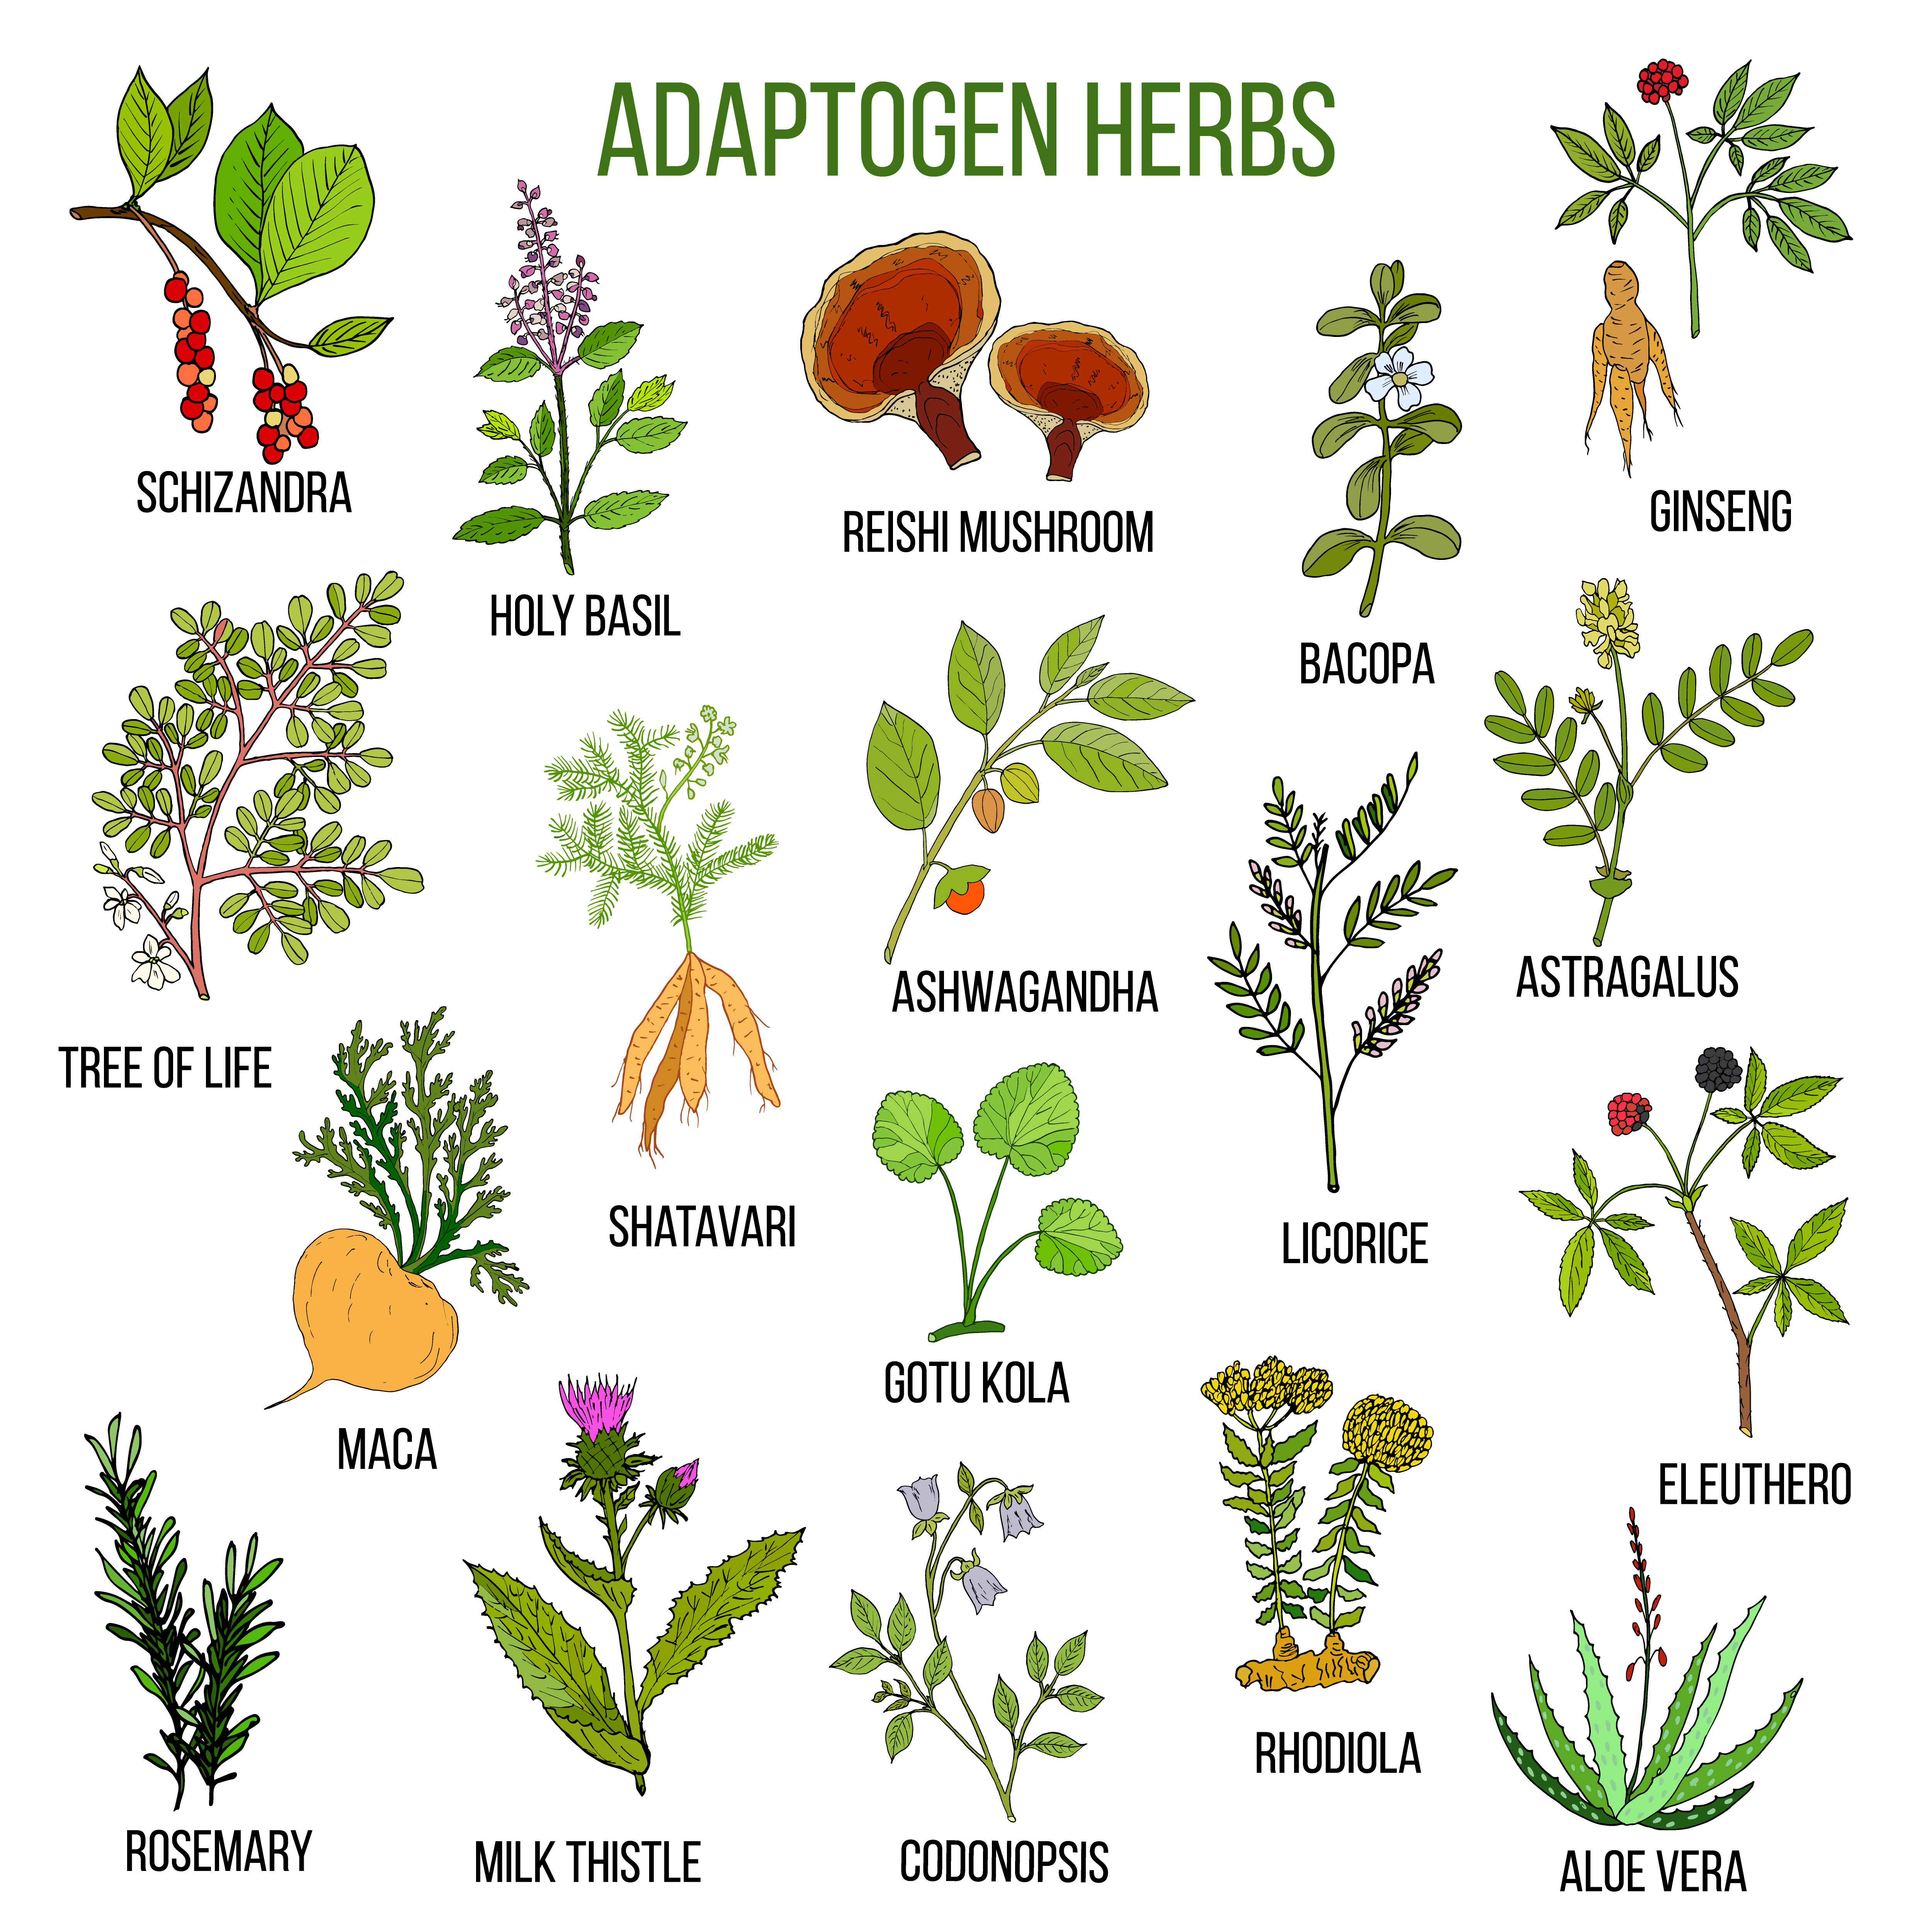 Adaptogenic herbs seems to be the most convenient way to lower cortisol level